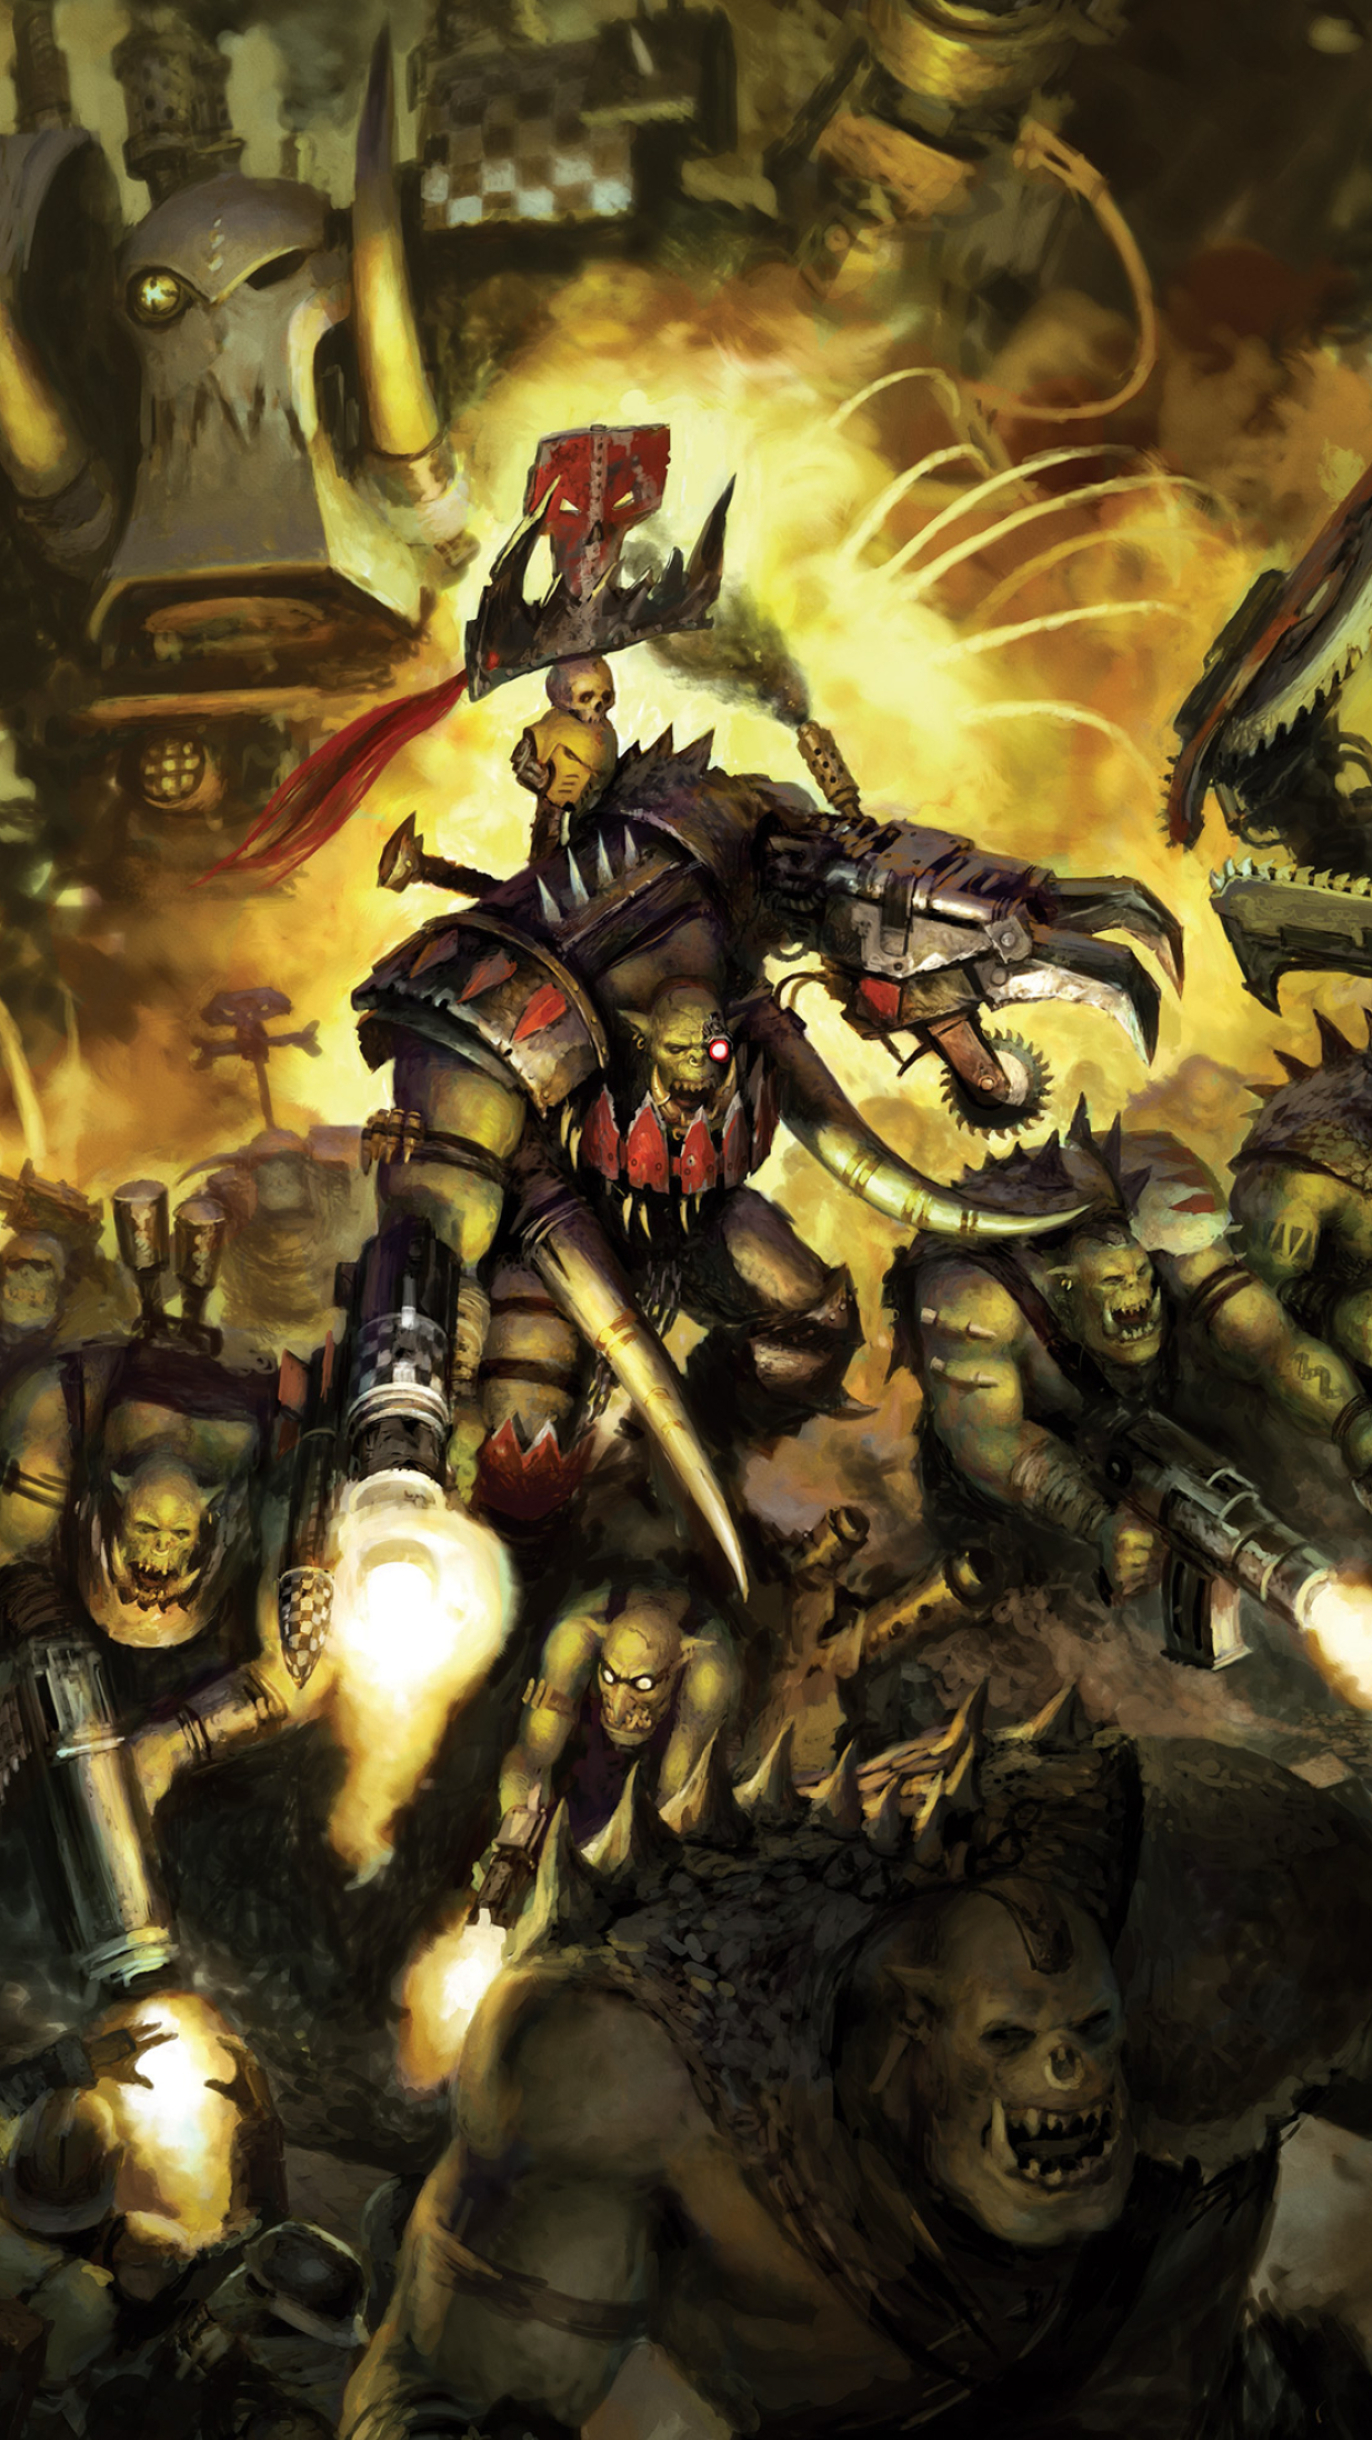 1372x2440 Download These Ded Snazzy Wallpapers From Codex: Orks For Free Warhammer Community